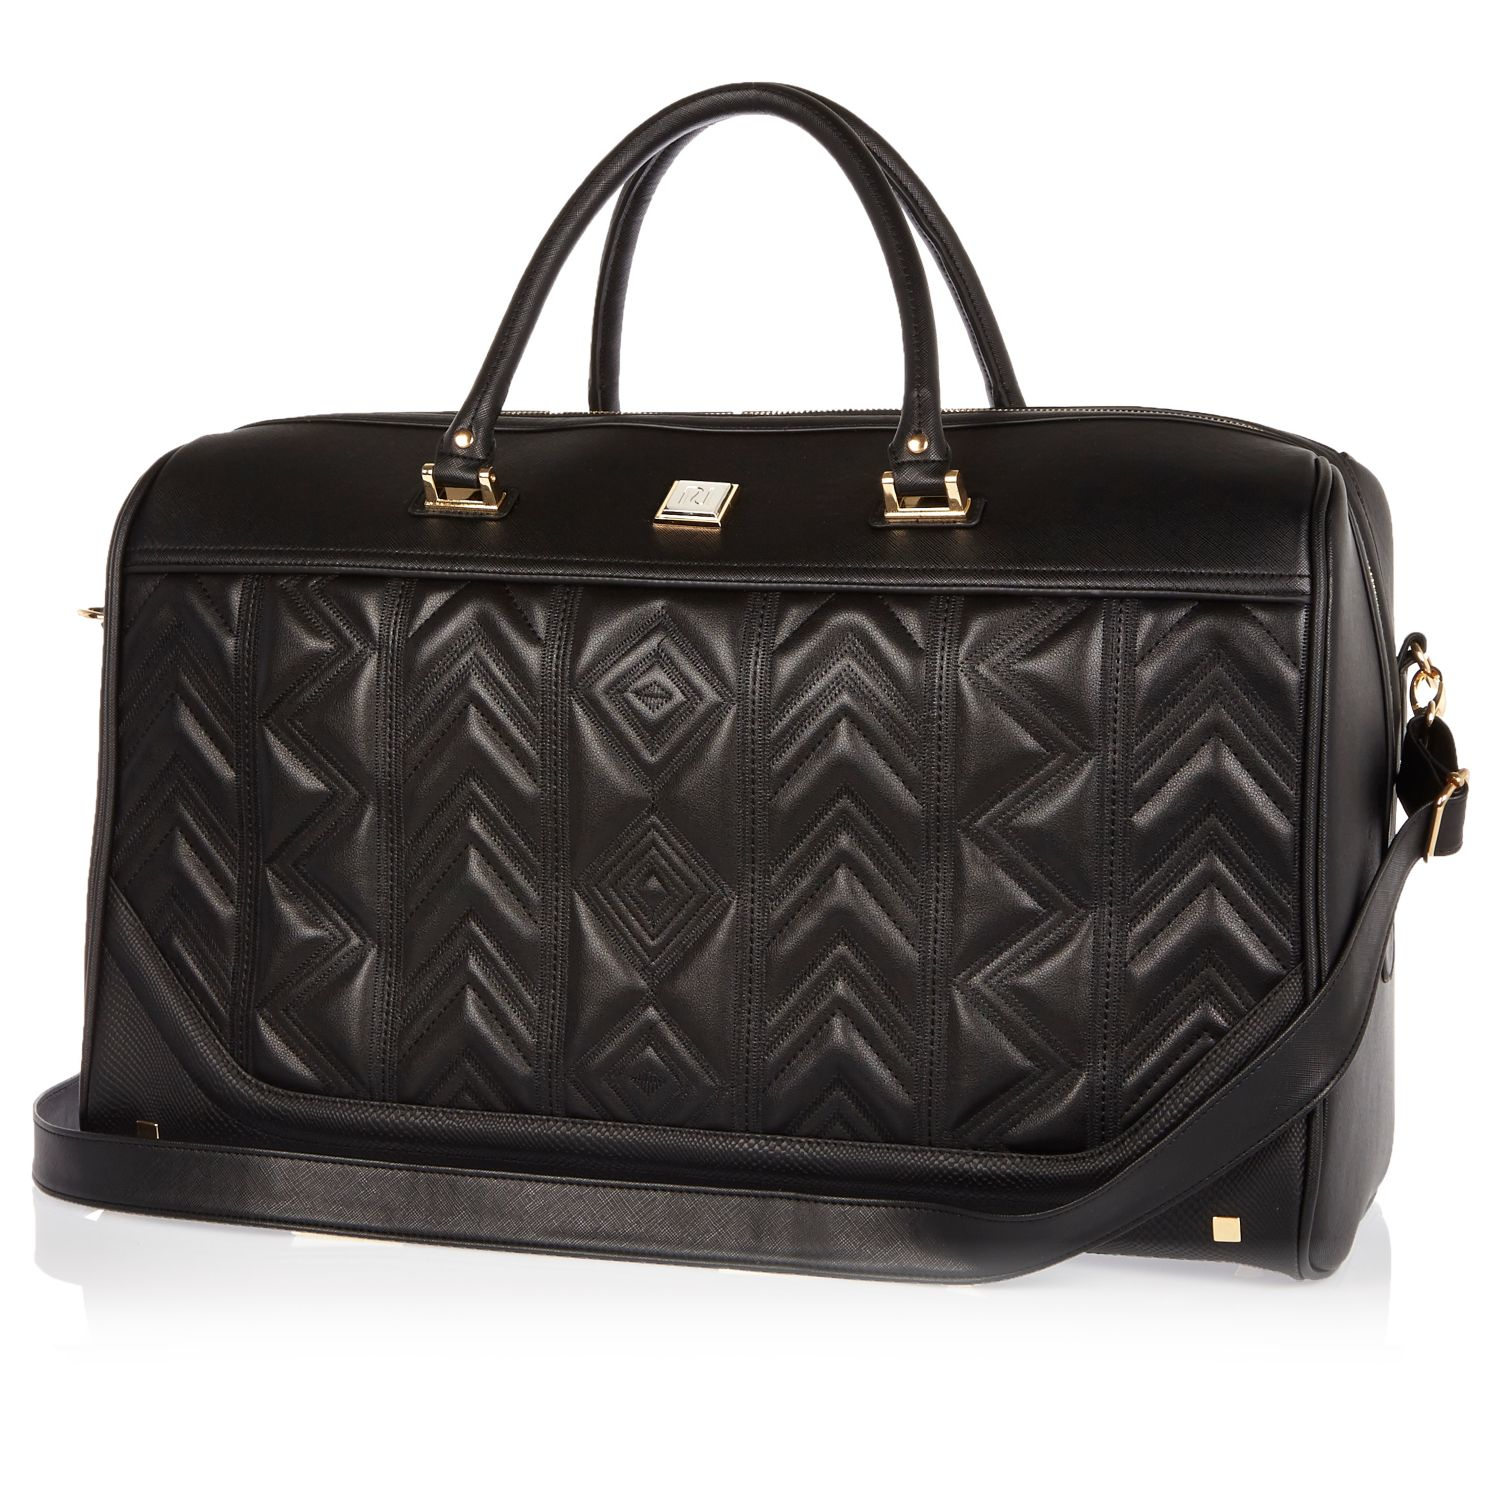 Lyst - River Island Black Embroidered Weekend Bag in Black